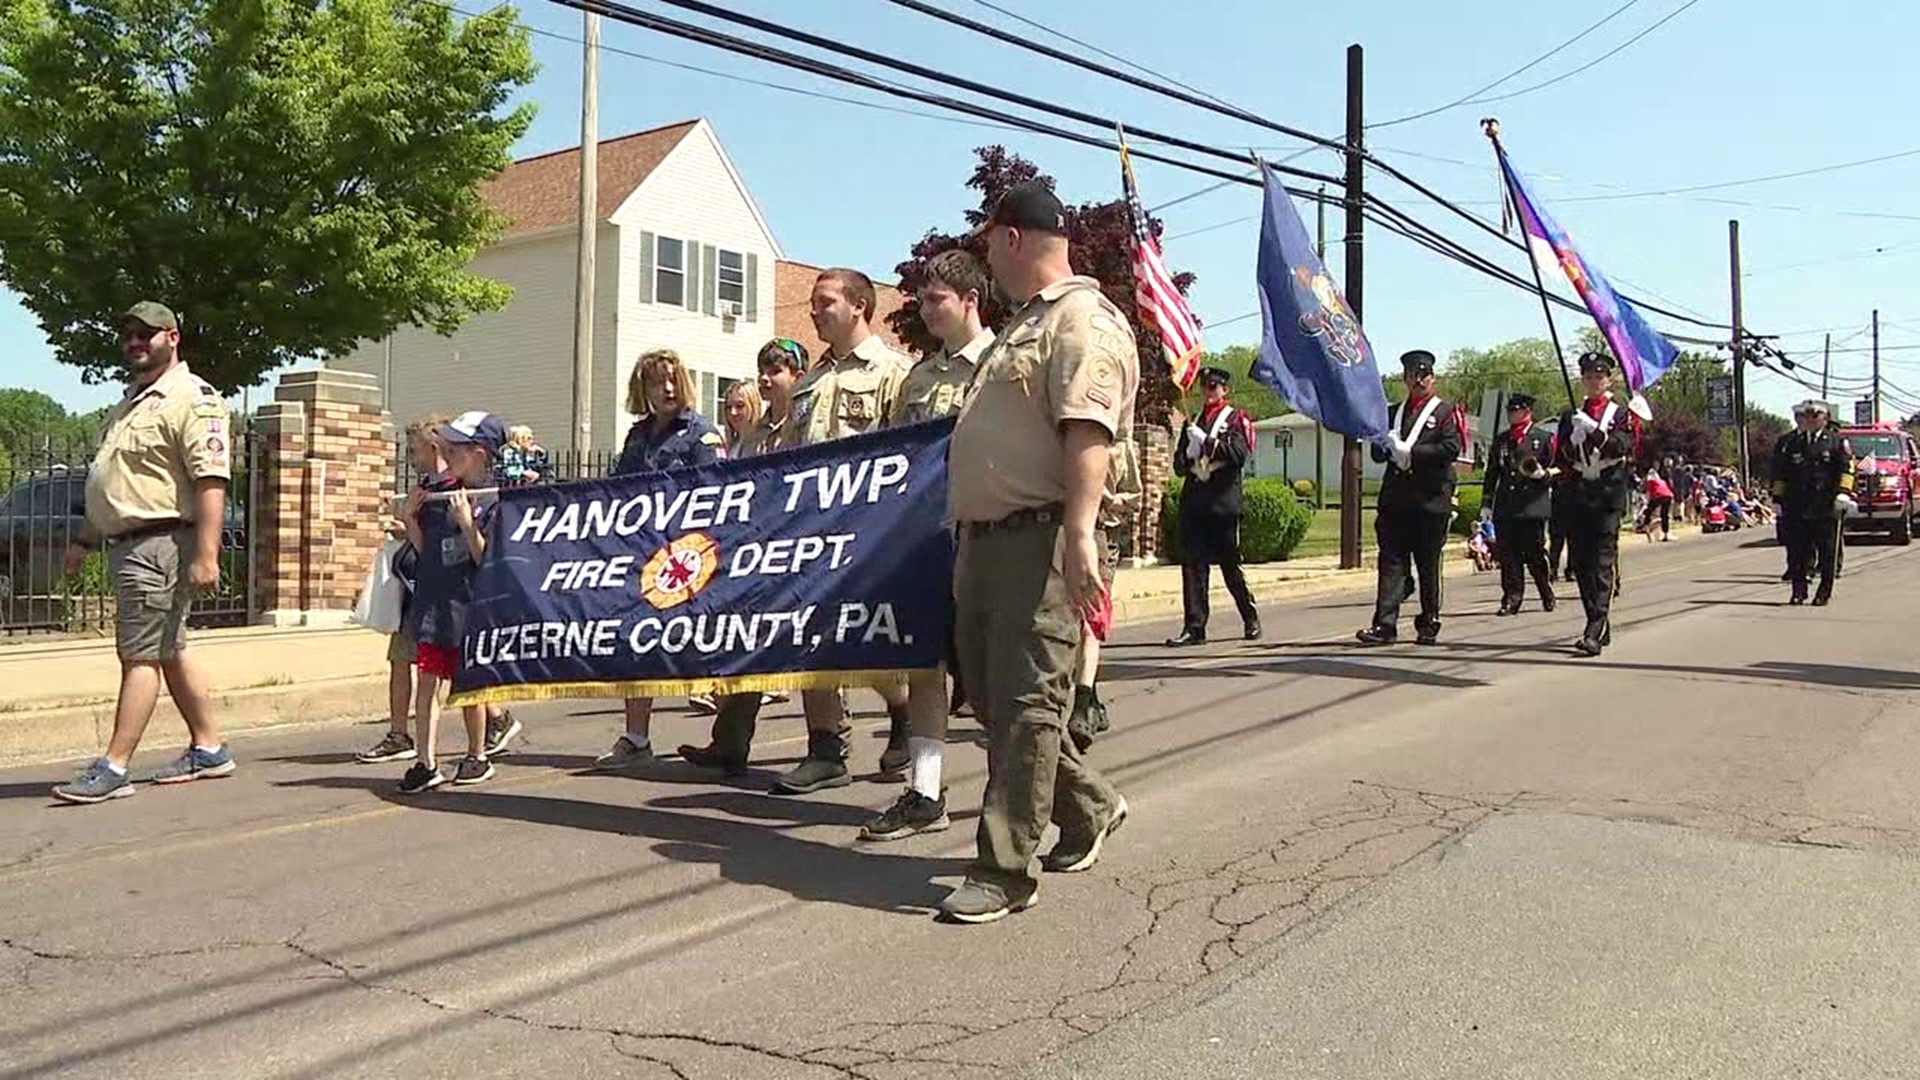 Memorial Day Parade steps off in Hanover Township